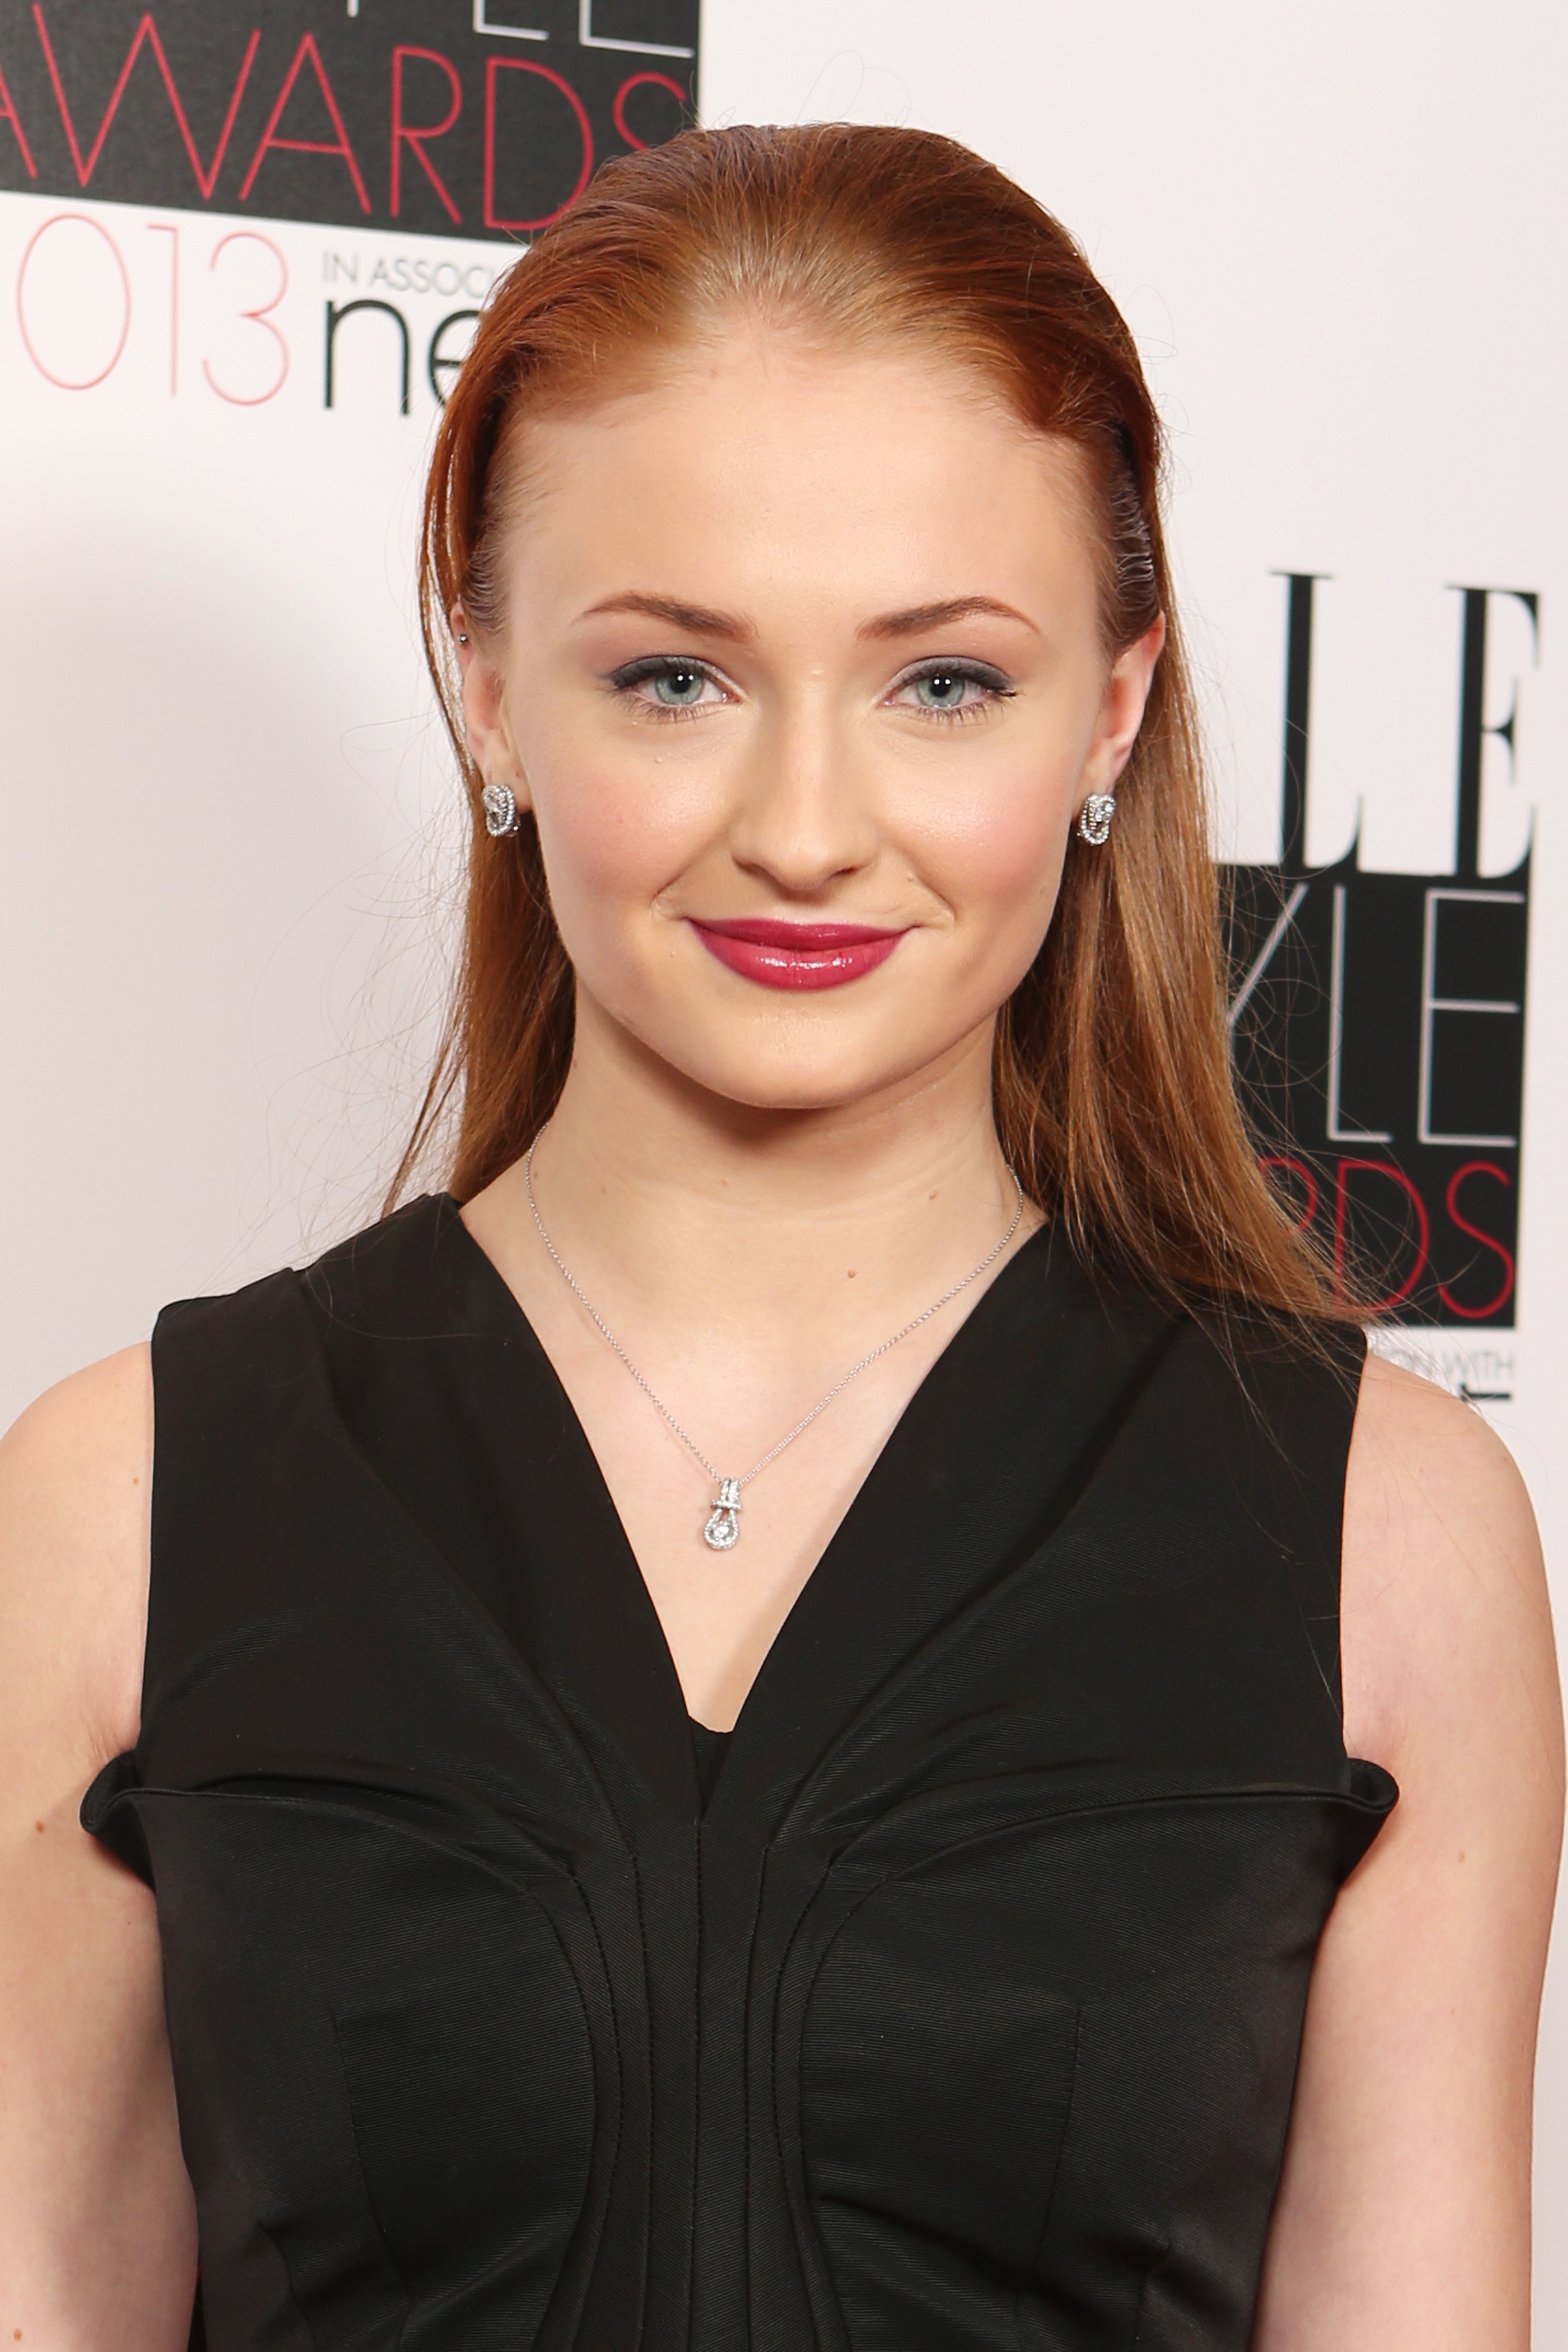 Sophie Turner attends the Elle Style Awards 2013 at The Savoy Hotel on February 11, 2013 in London, England | Photo: Getty Images